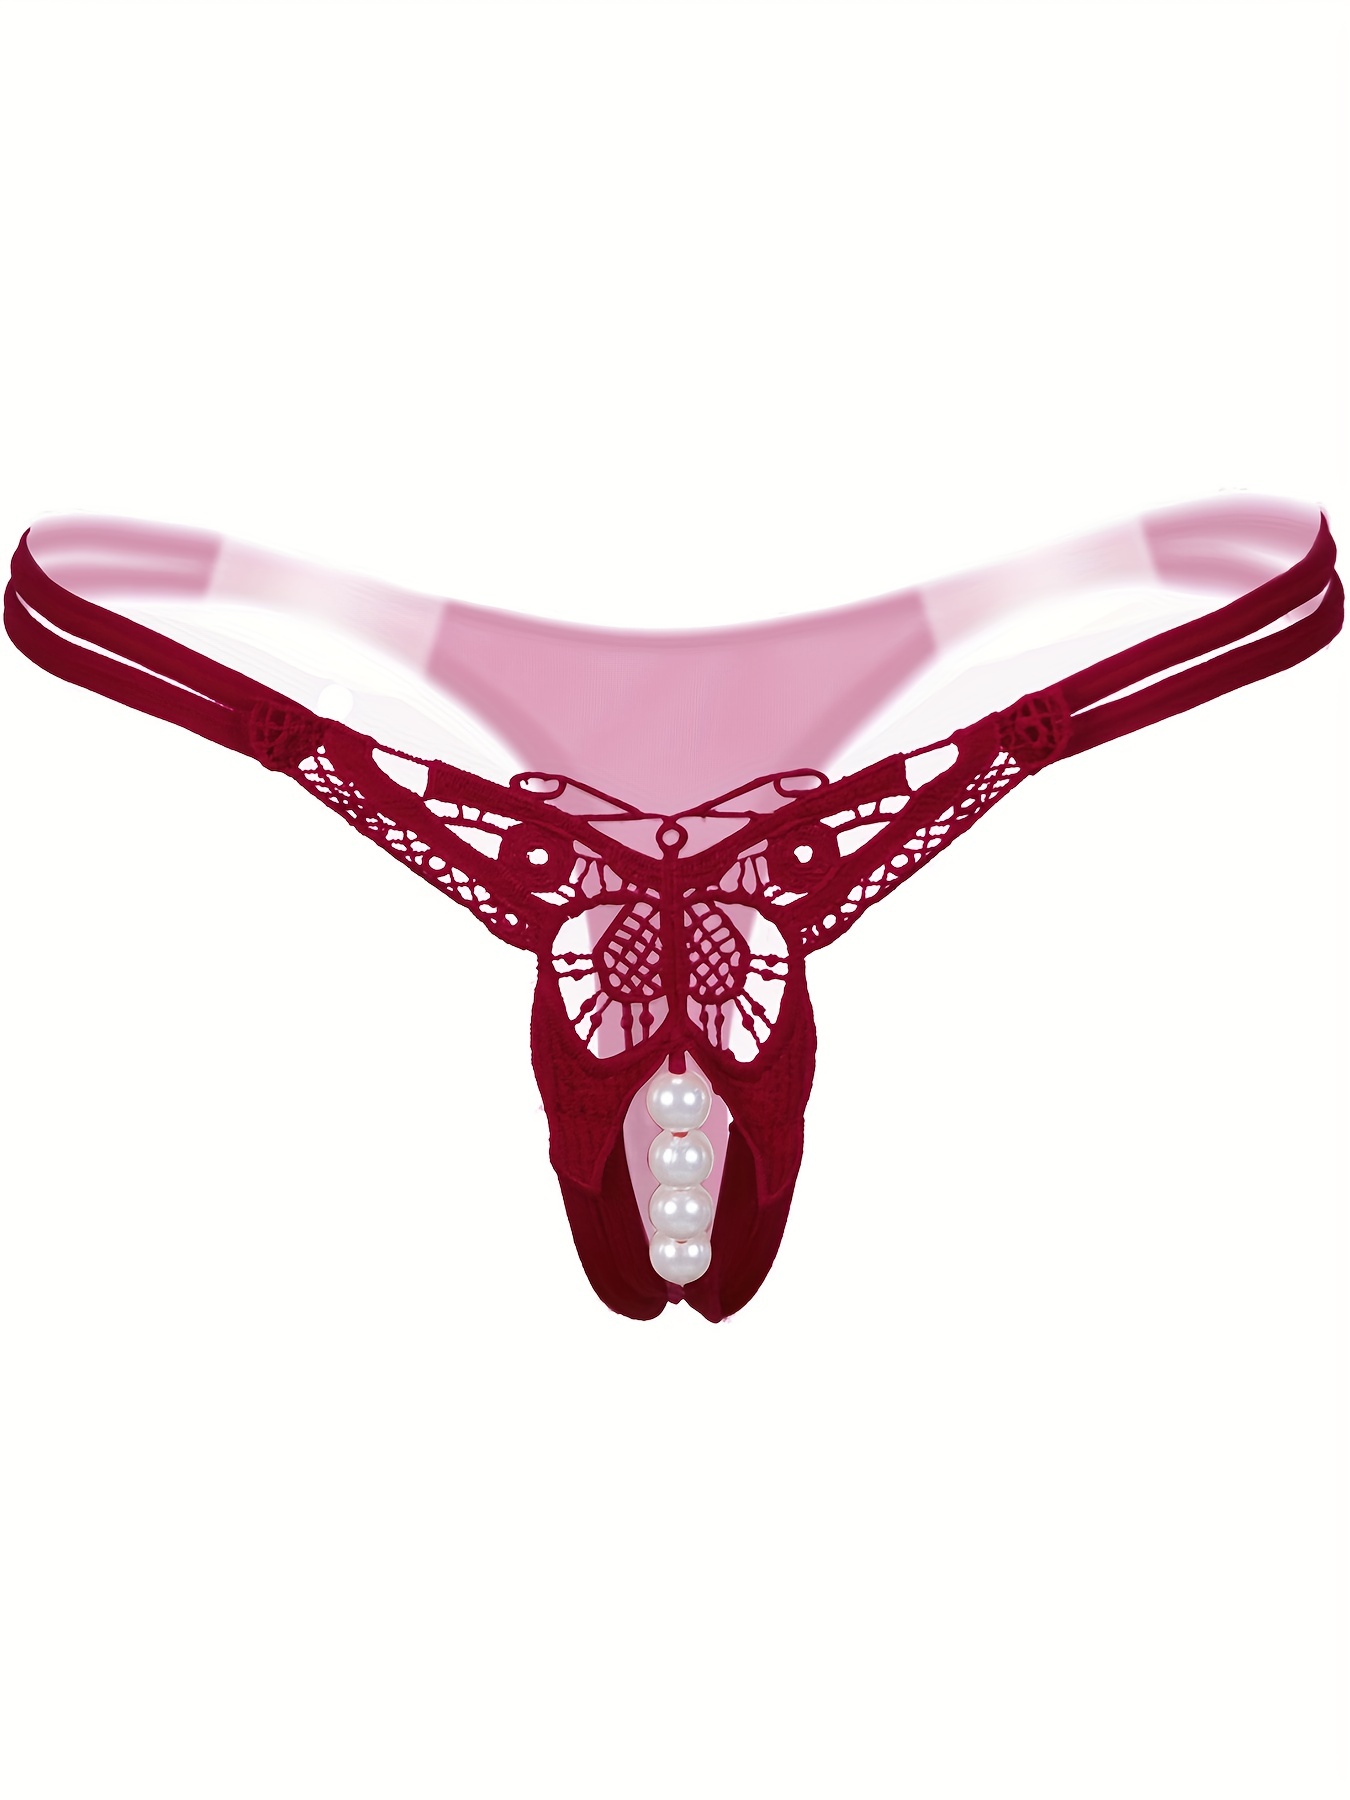 Buy Butterfly G String-lingerie Crotchless Open Crotch Panties